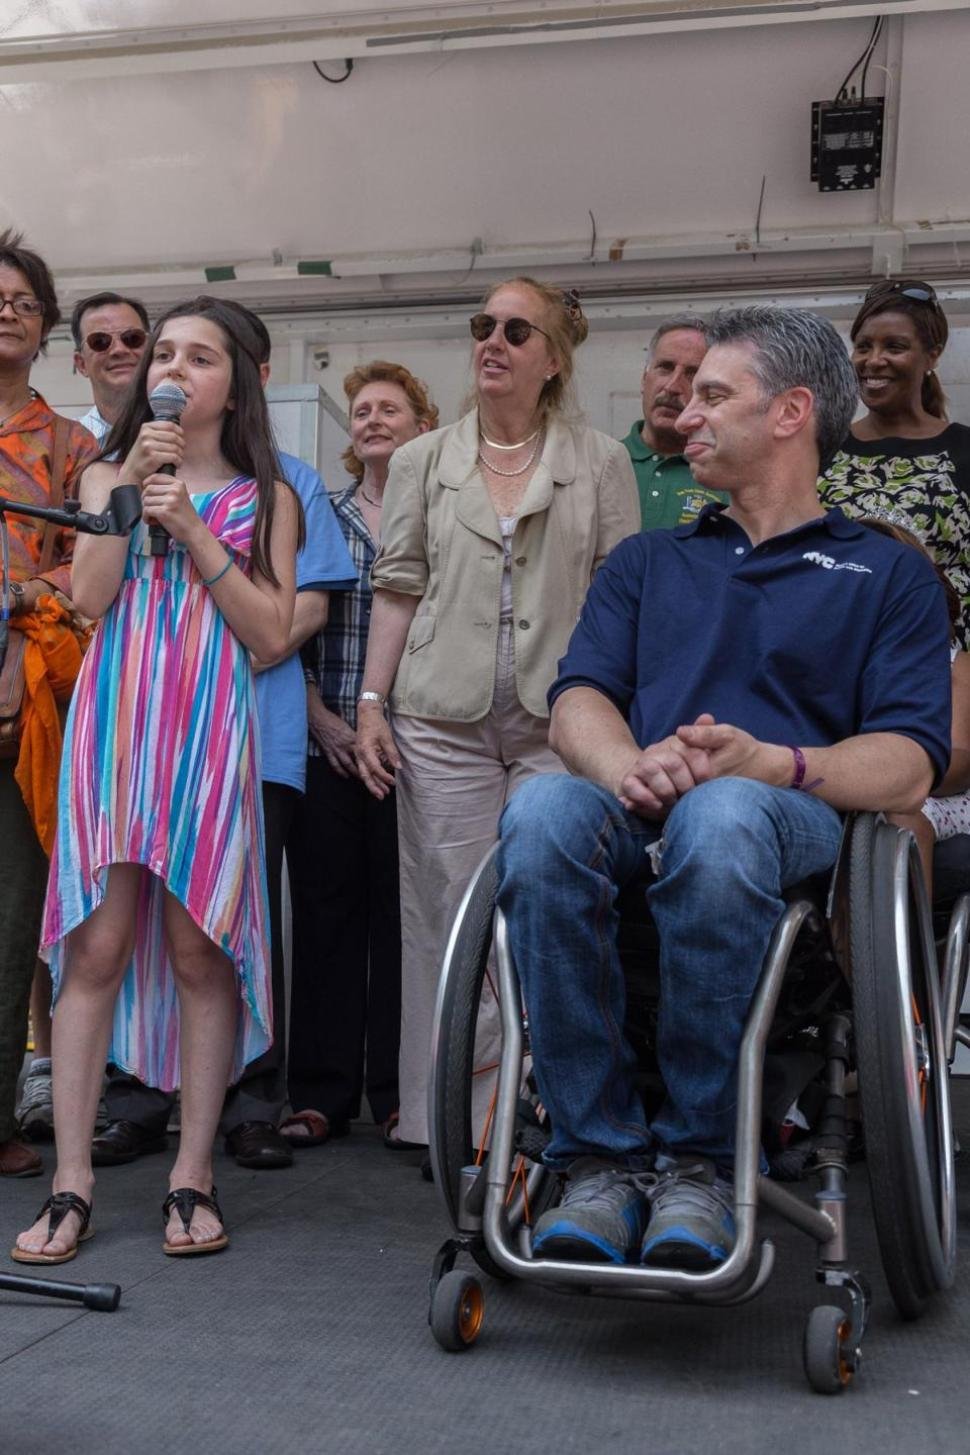 Victor Calise, commissioner of the Mayor's Office for People with Disabilities, next to his daughter Lola Claise who sings a song to kick off the parade